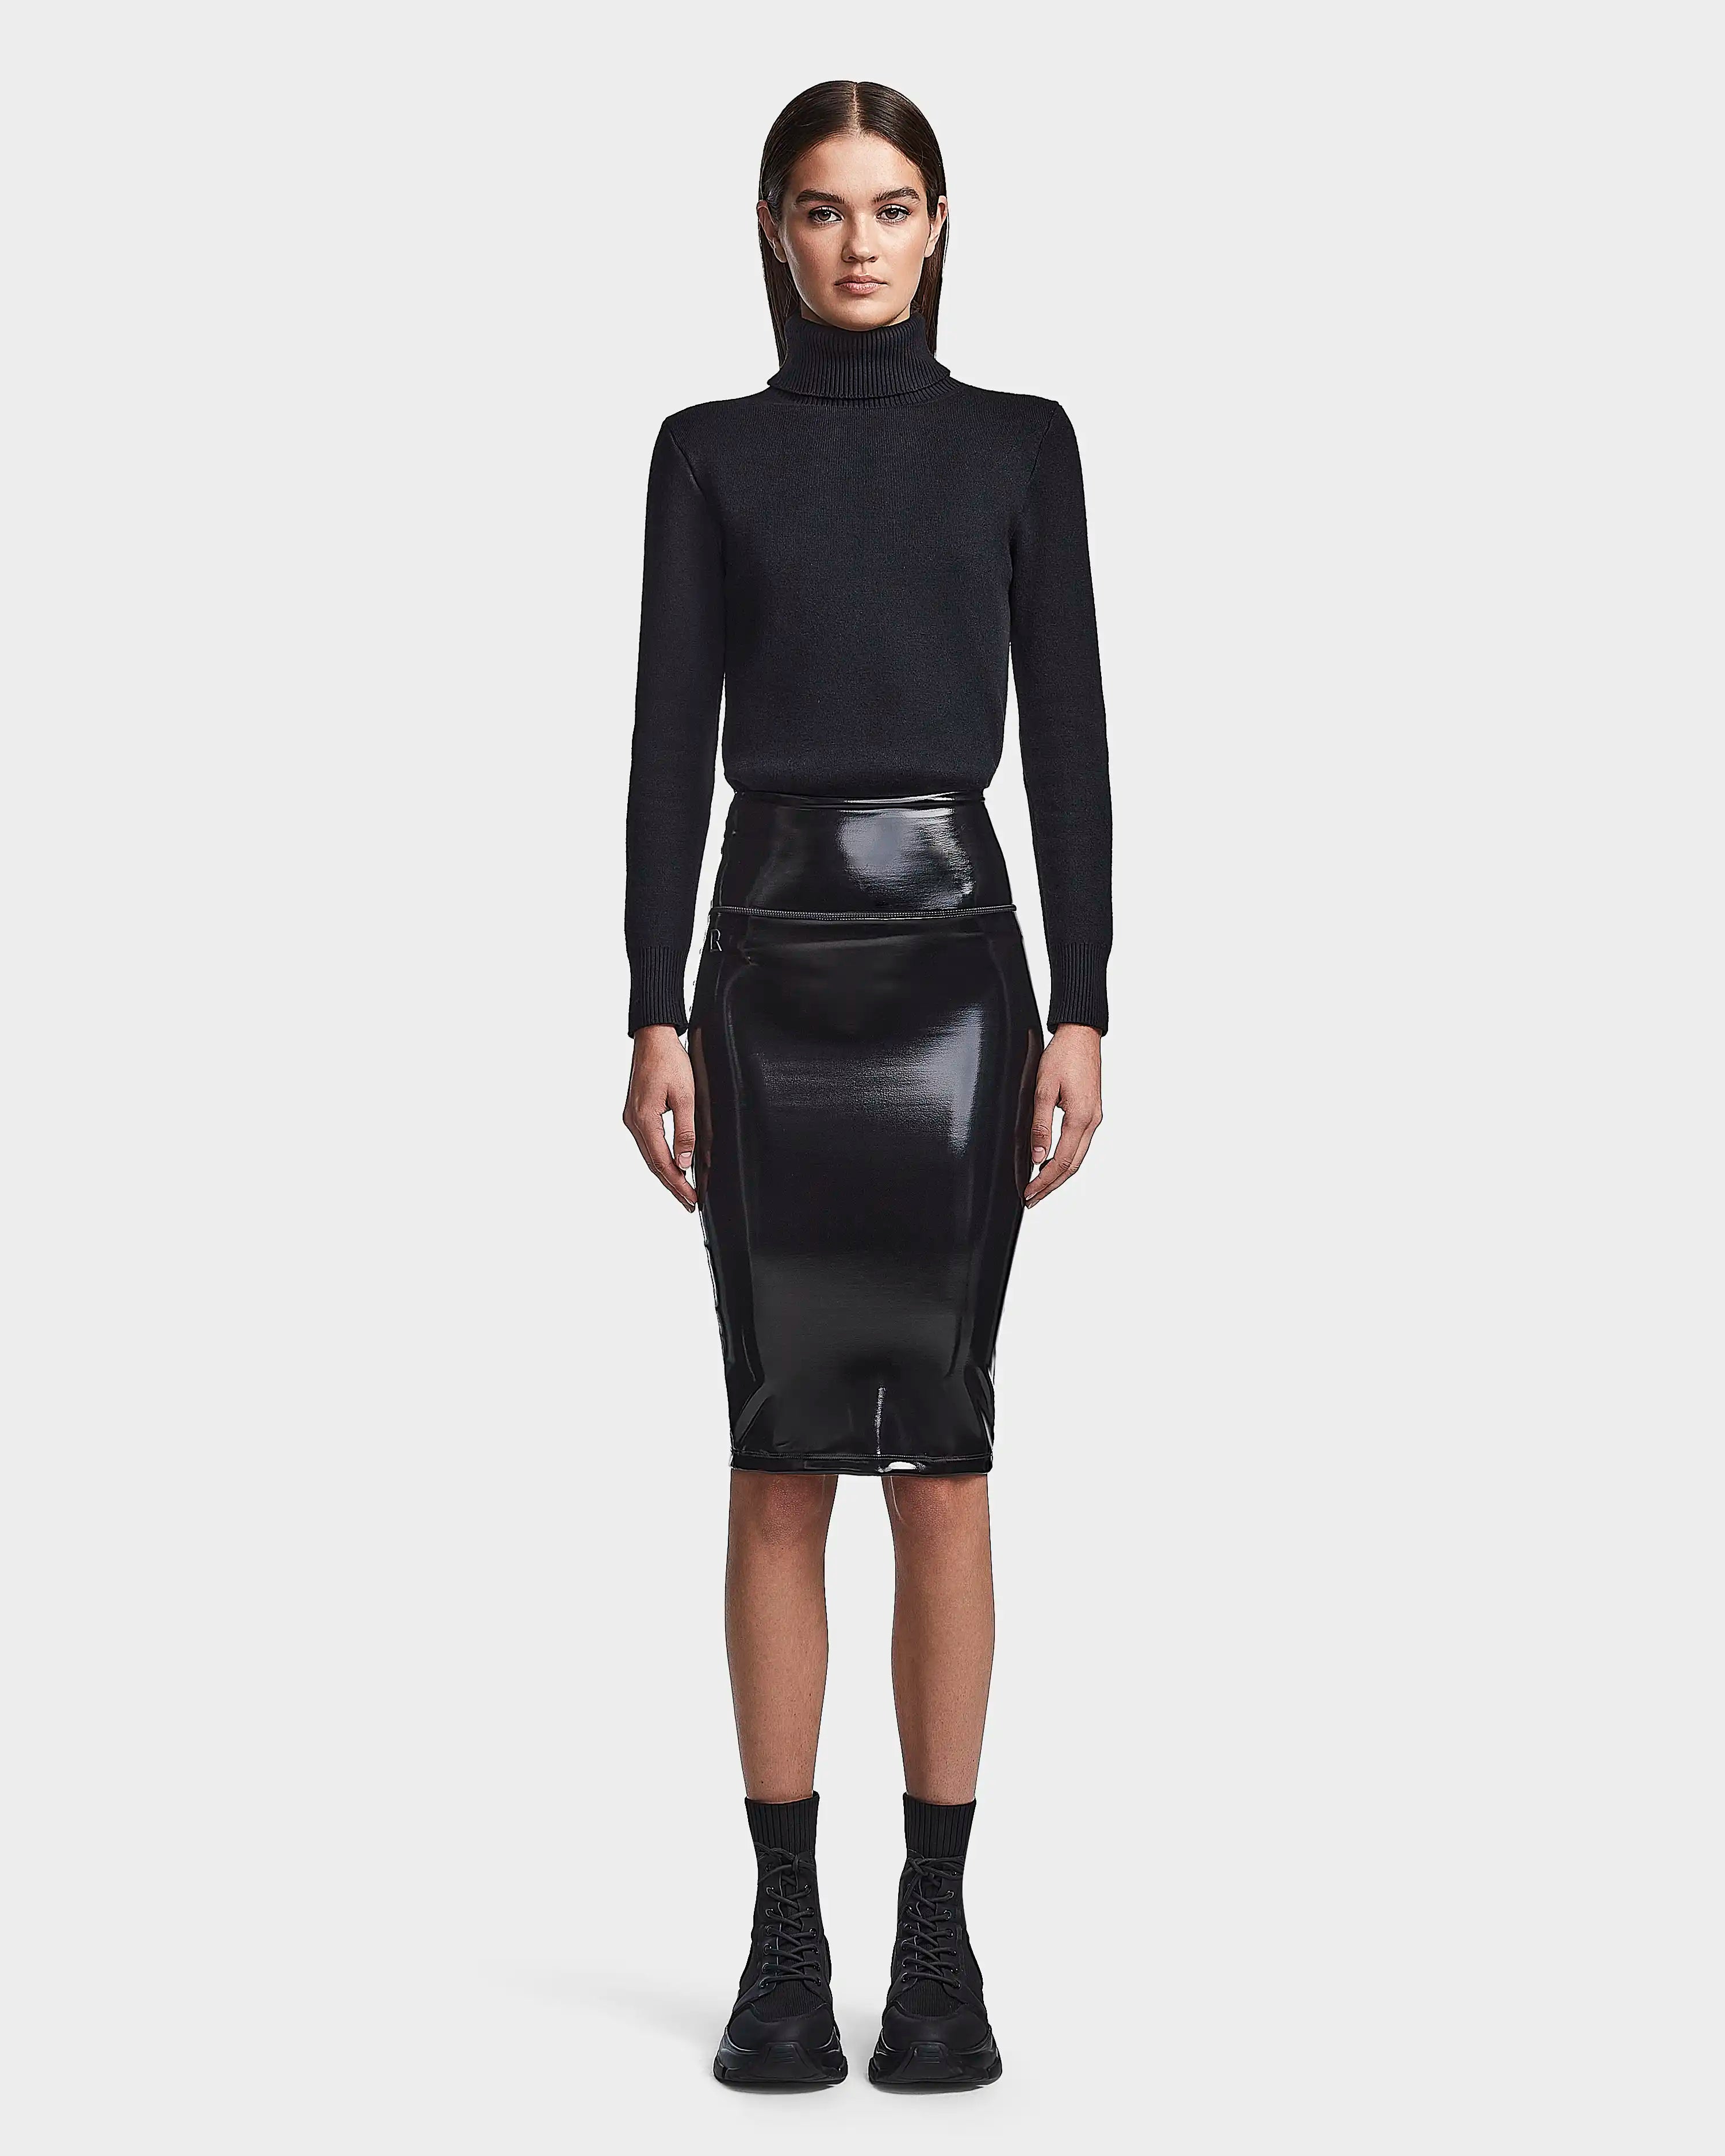 Women's patent leather pencil skirt CANDICE